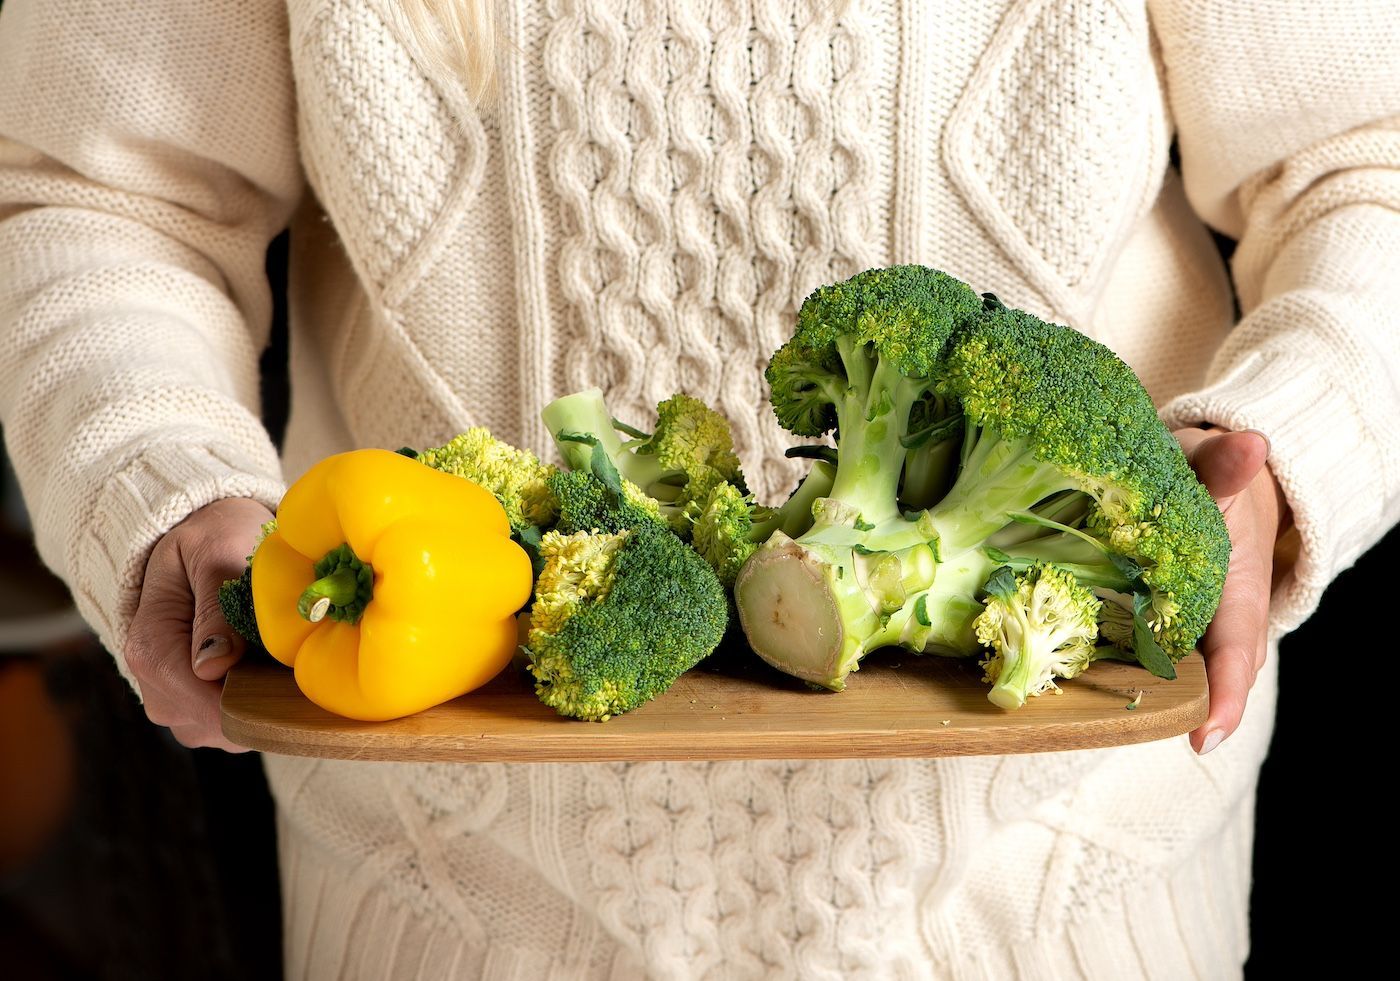 Broccoli, Basil, Eggs & Dairy All Help in Vitamin K Consumption. Learn More With Chews Your Health.